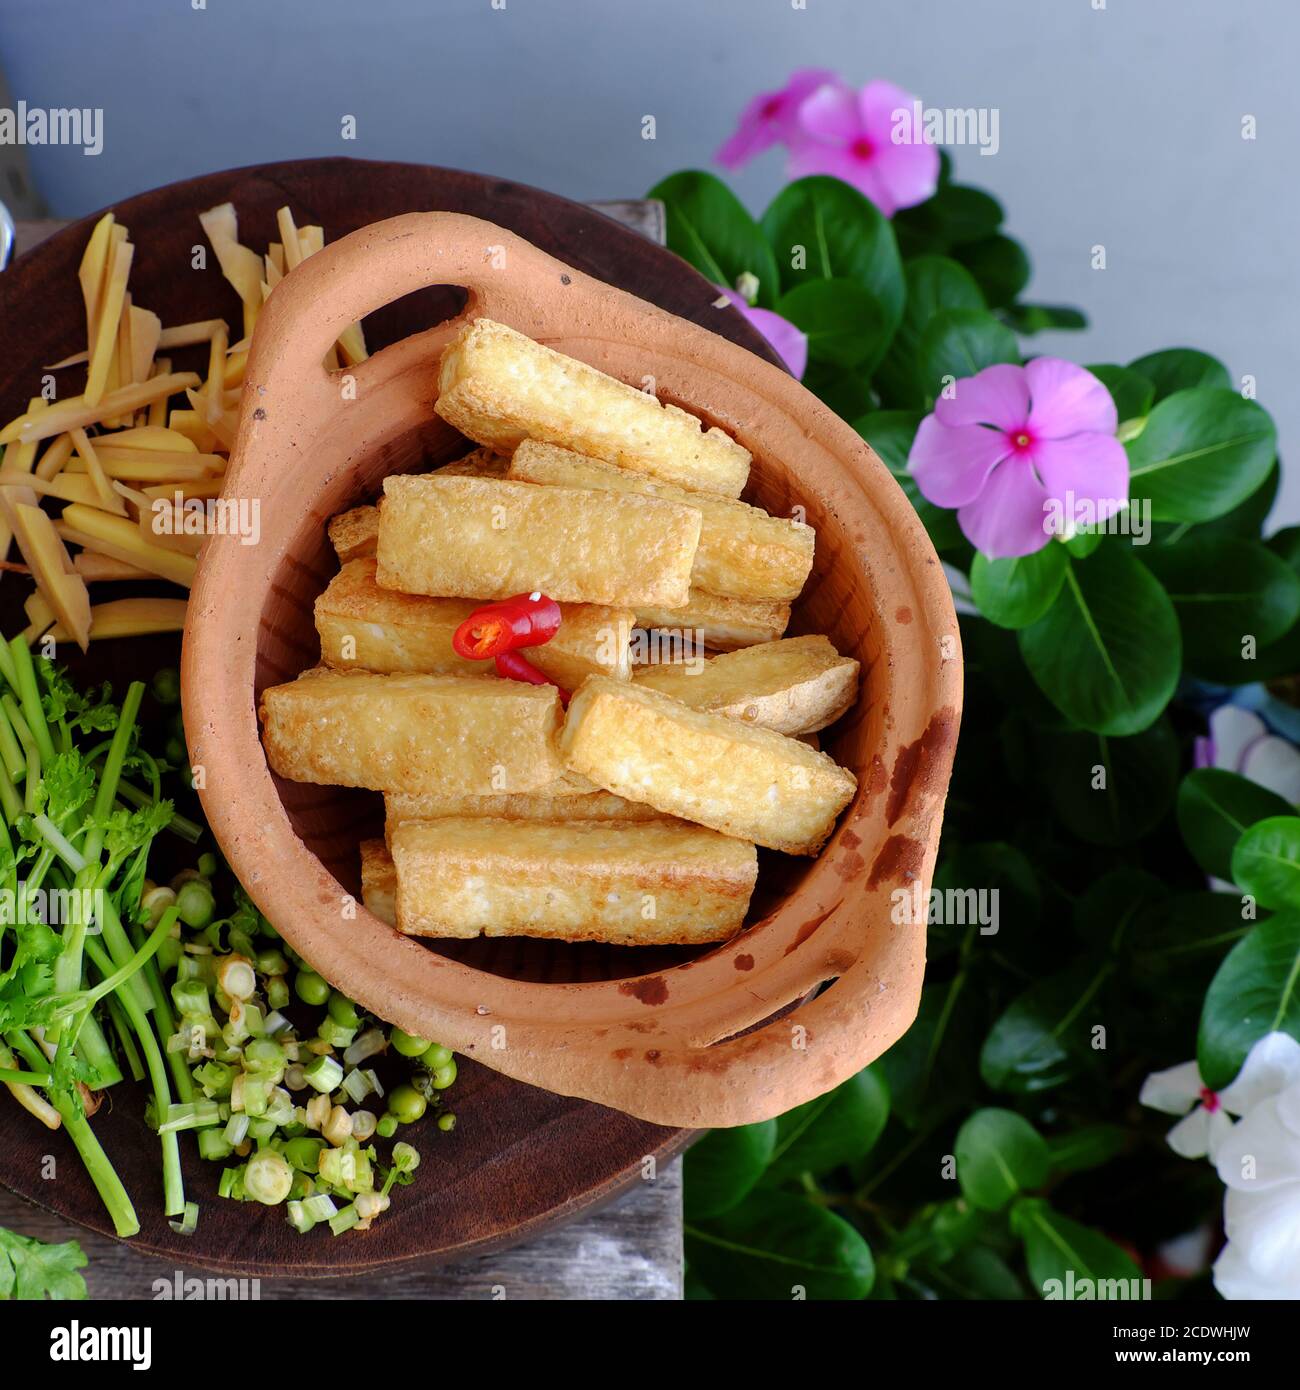 Top view sliced fried tofu with spice as ginger, pepper, cilantro for simple homemade vegan food Stock Photo